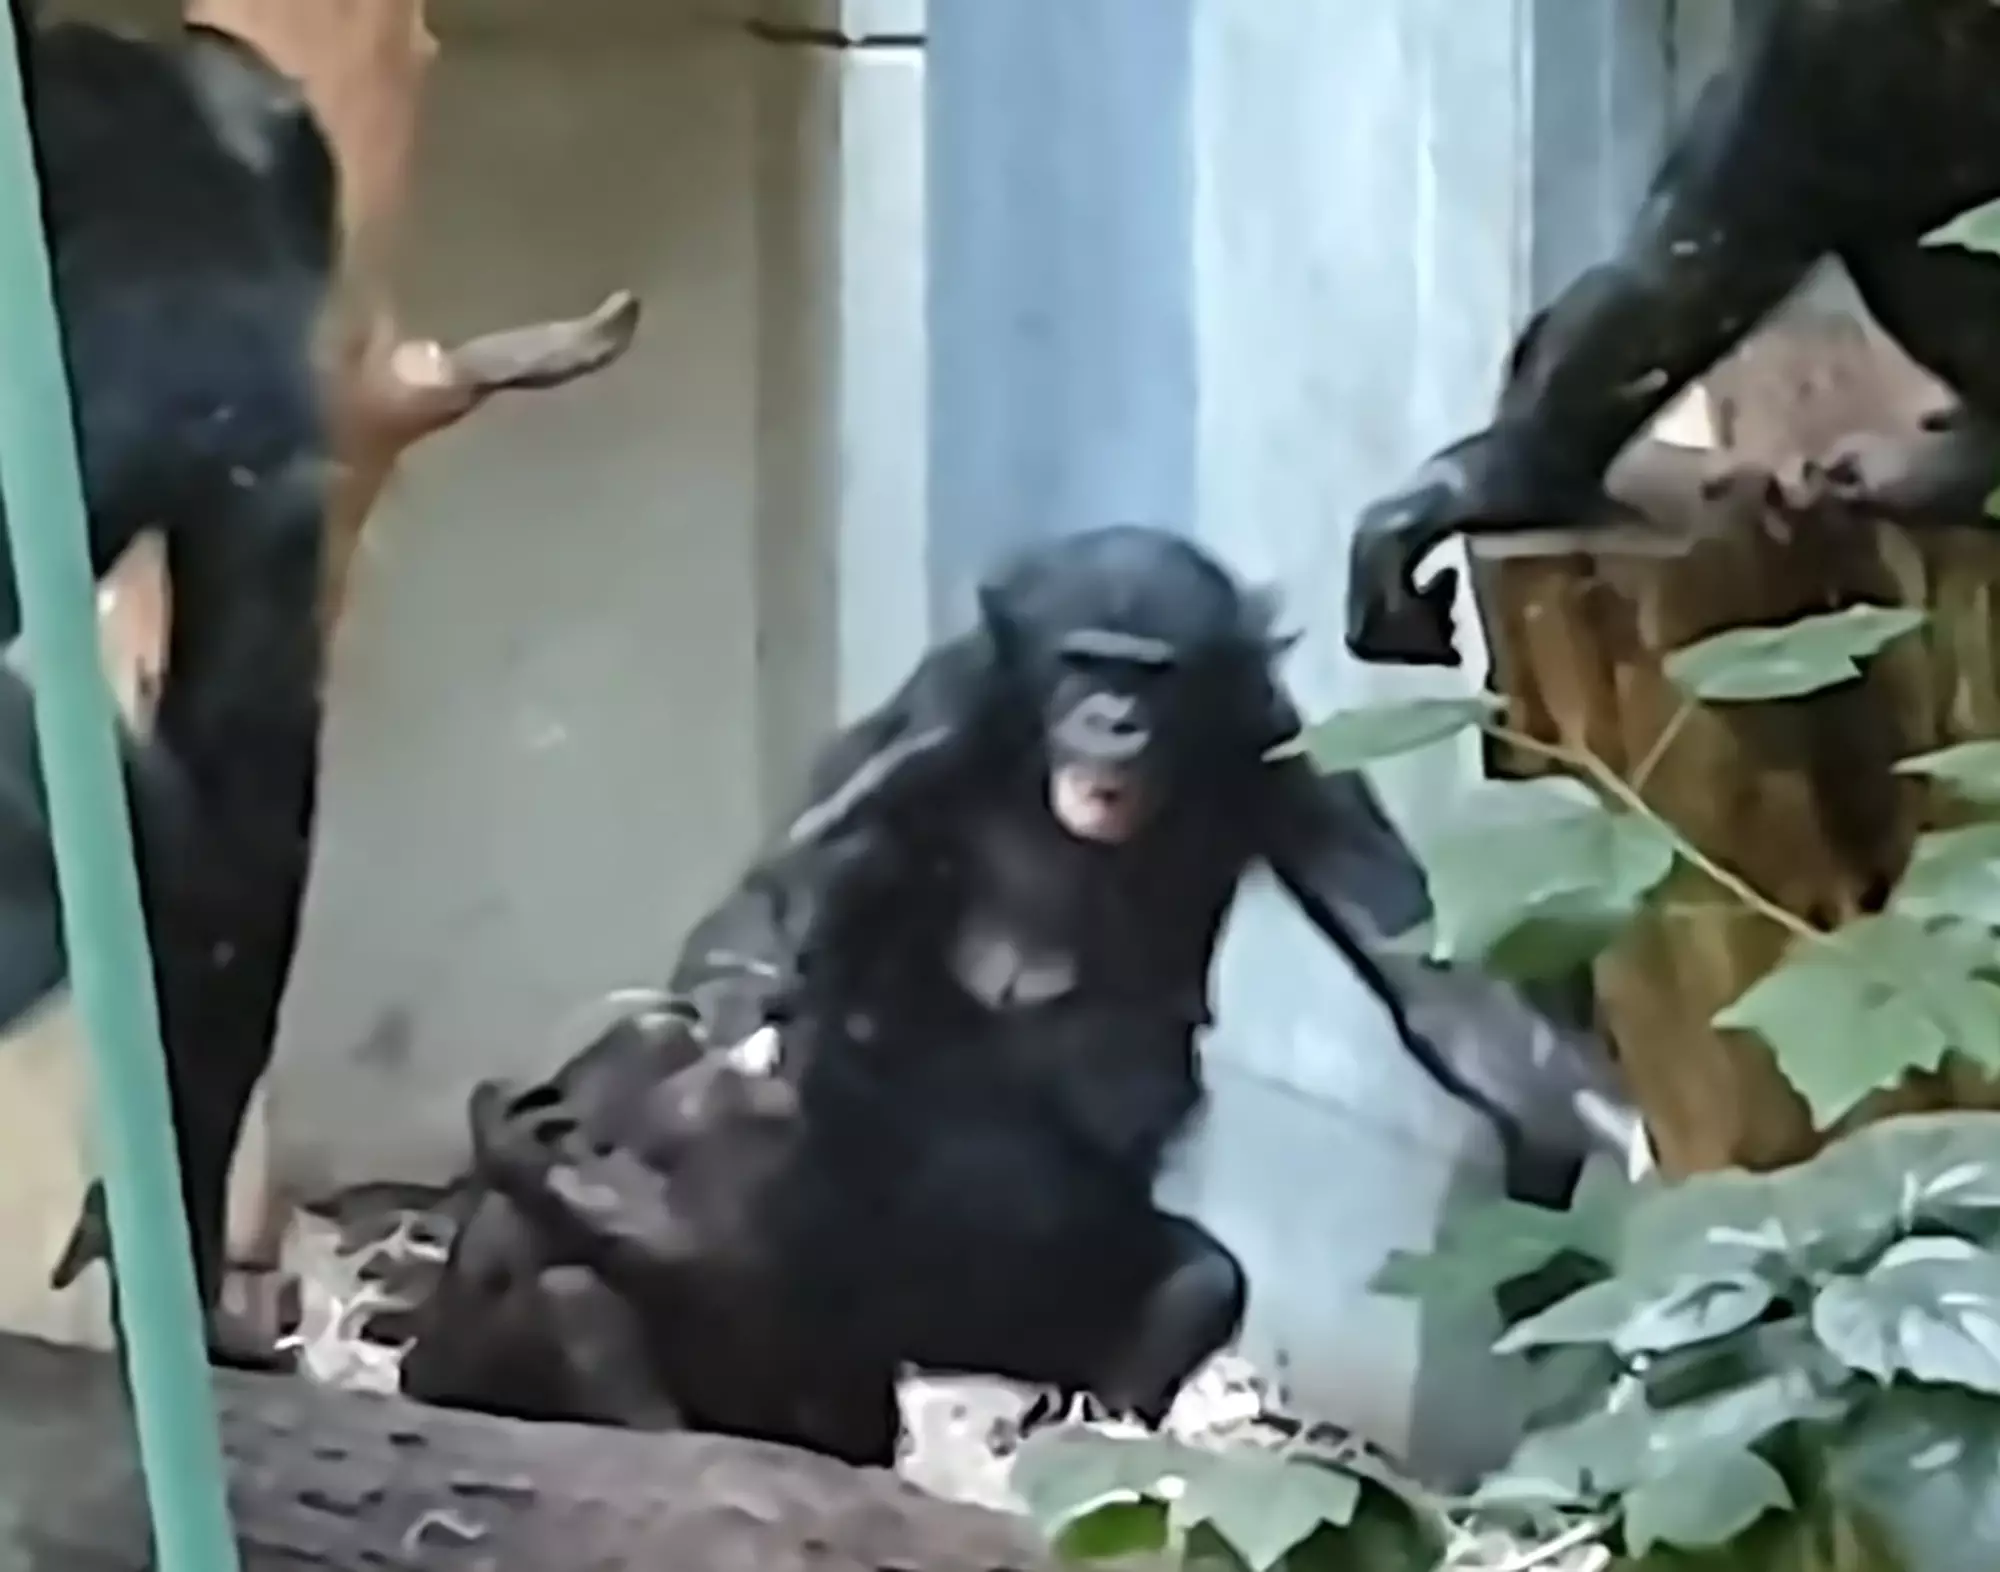 Bili had previously been targeted by other chimps at the zoo.